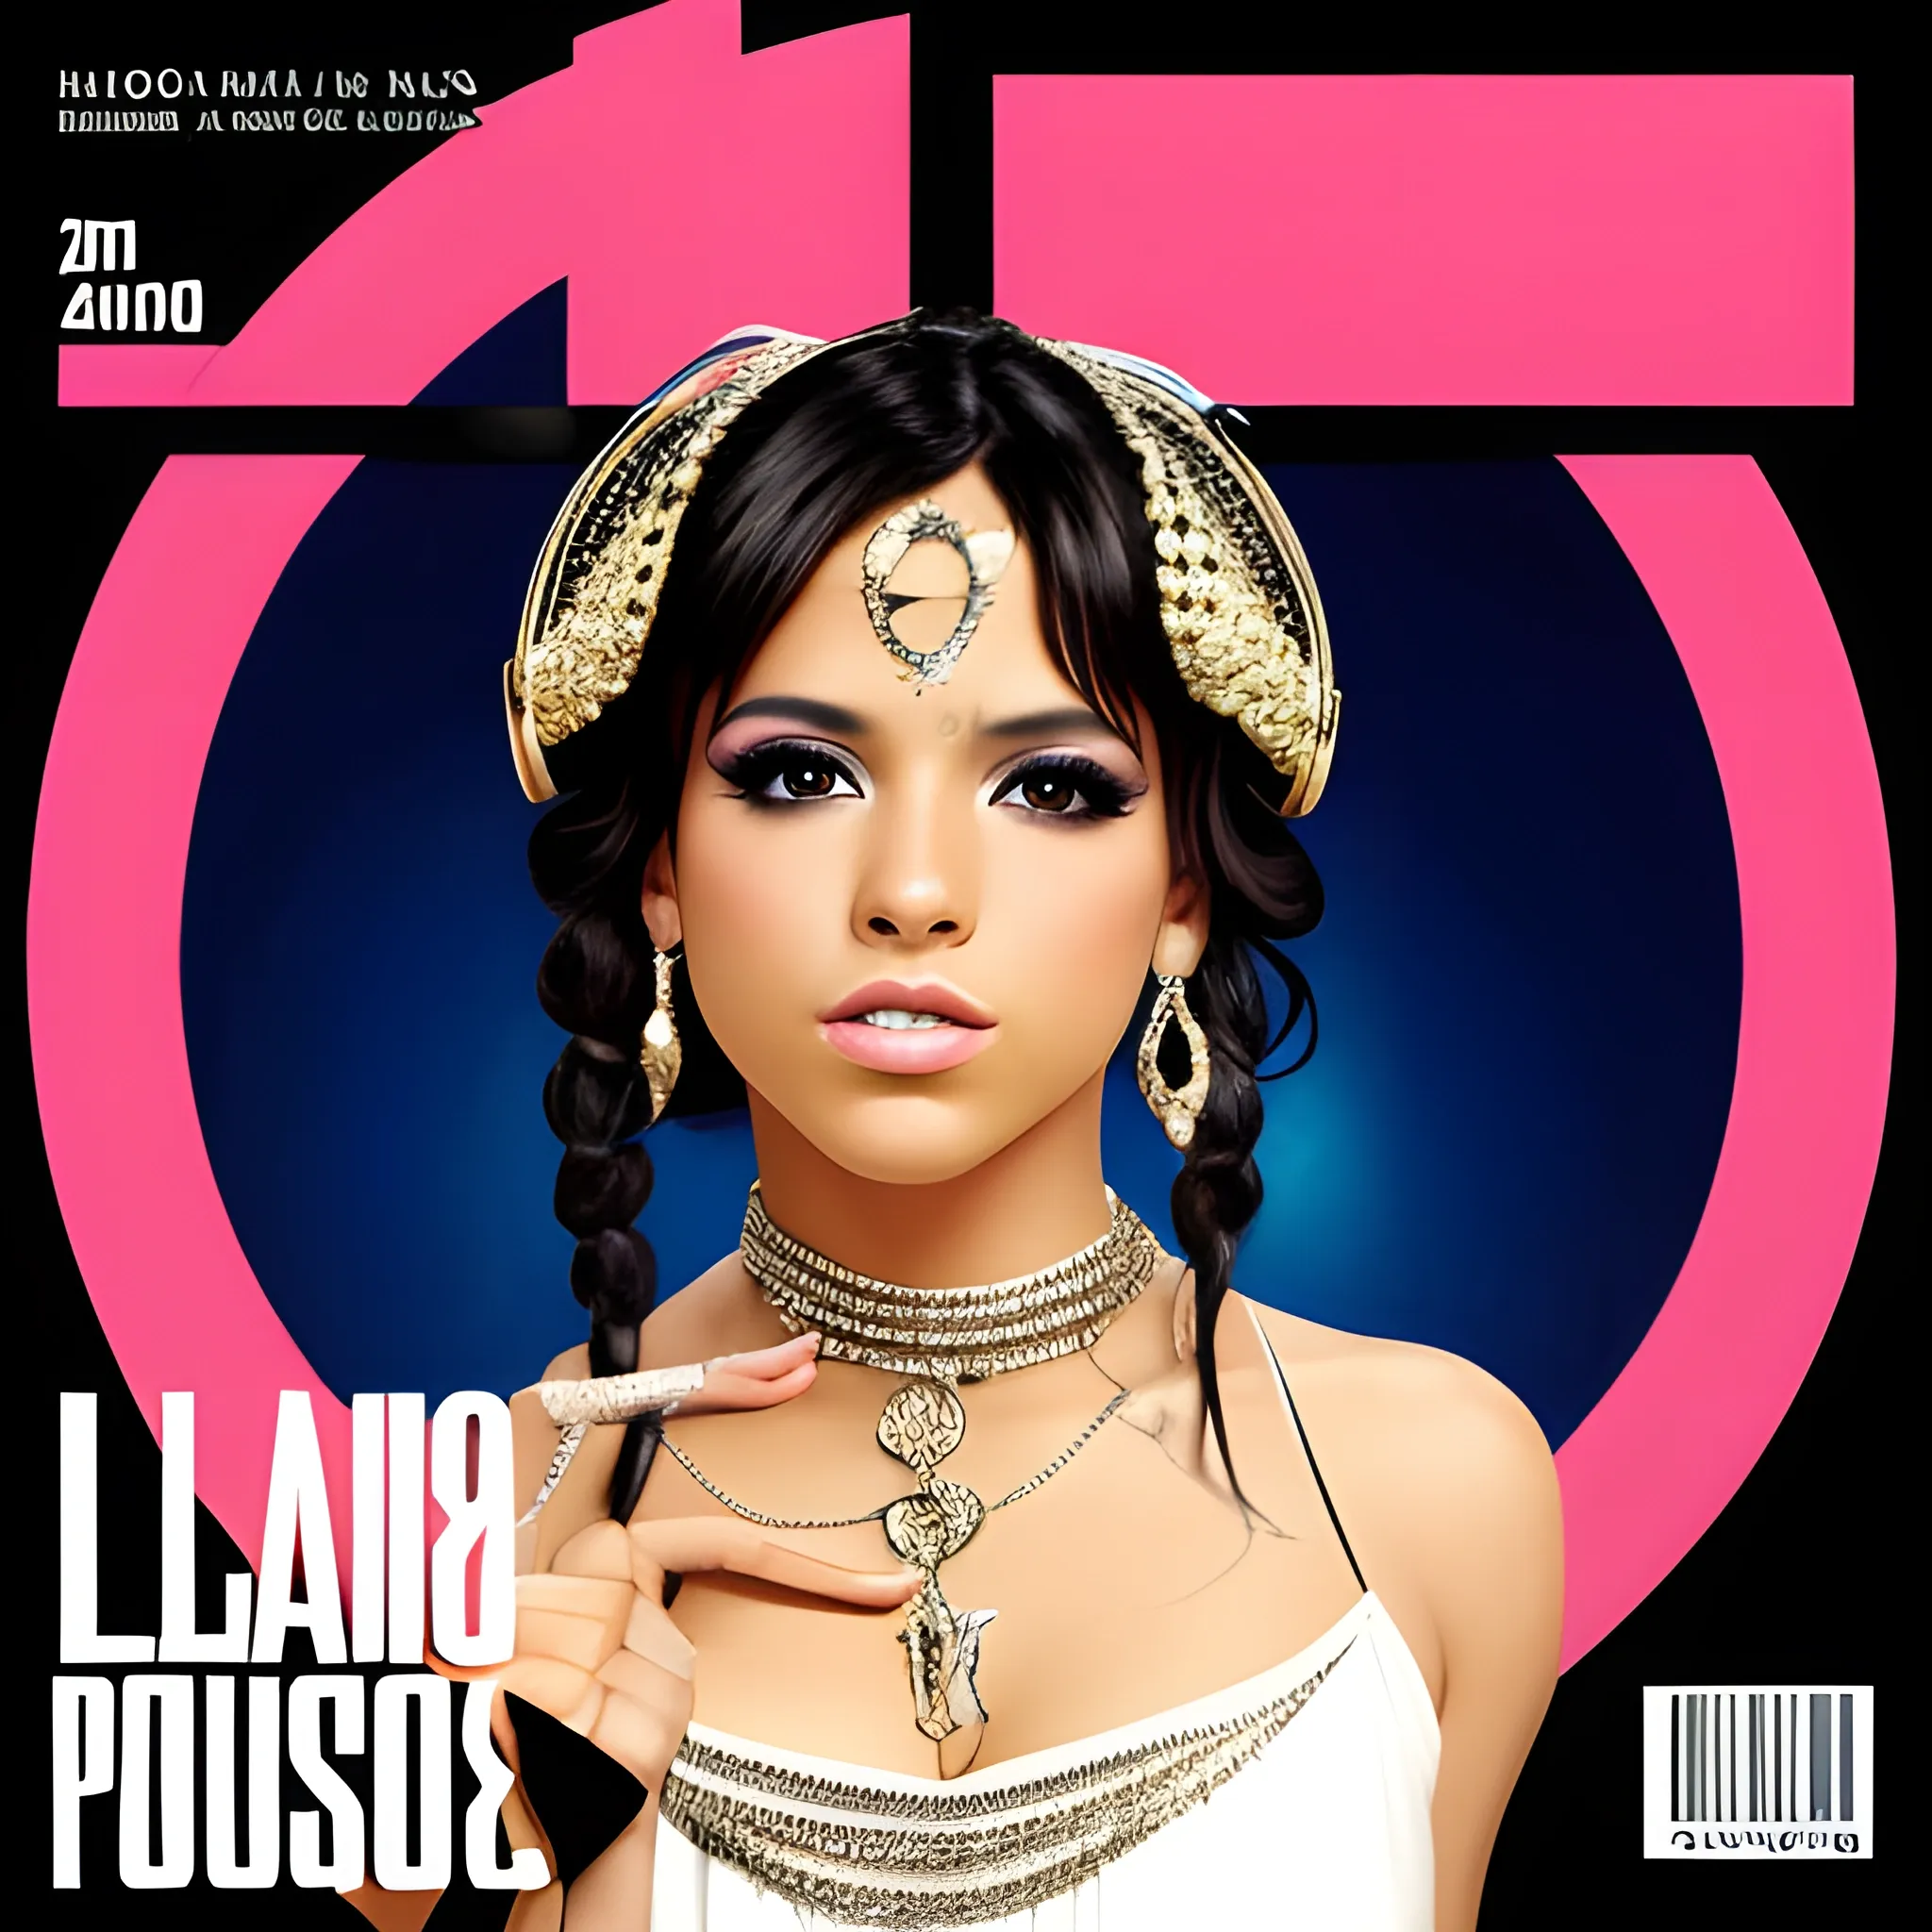 latin and pop music cover 2010
